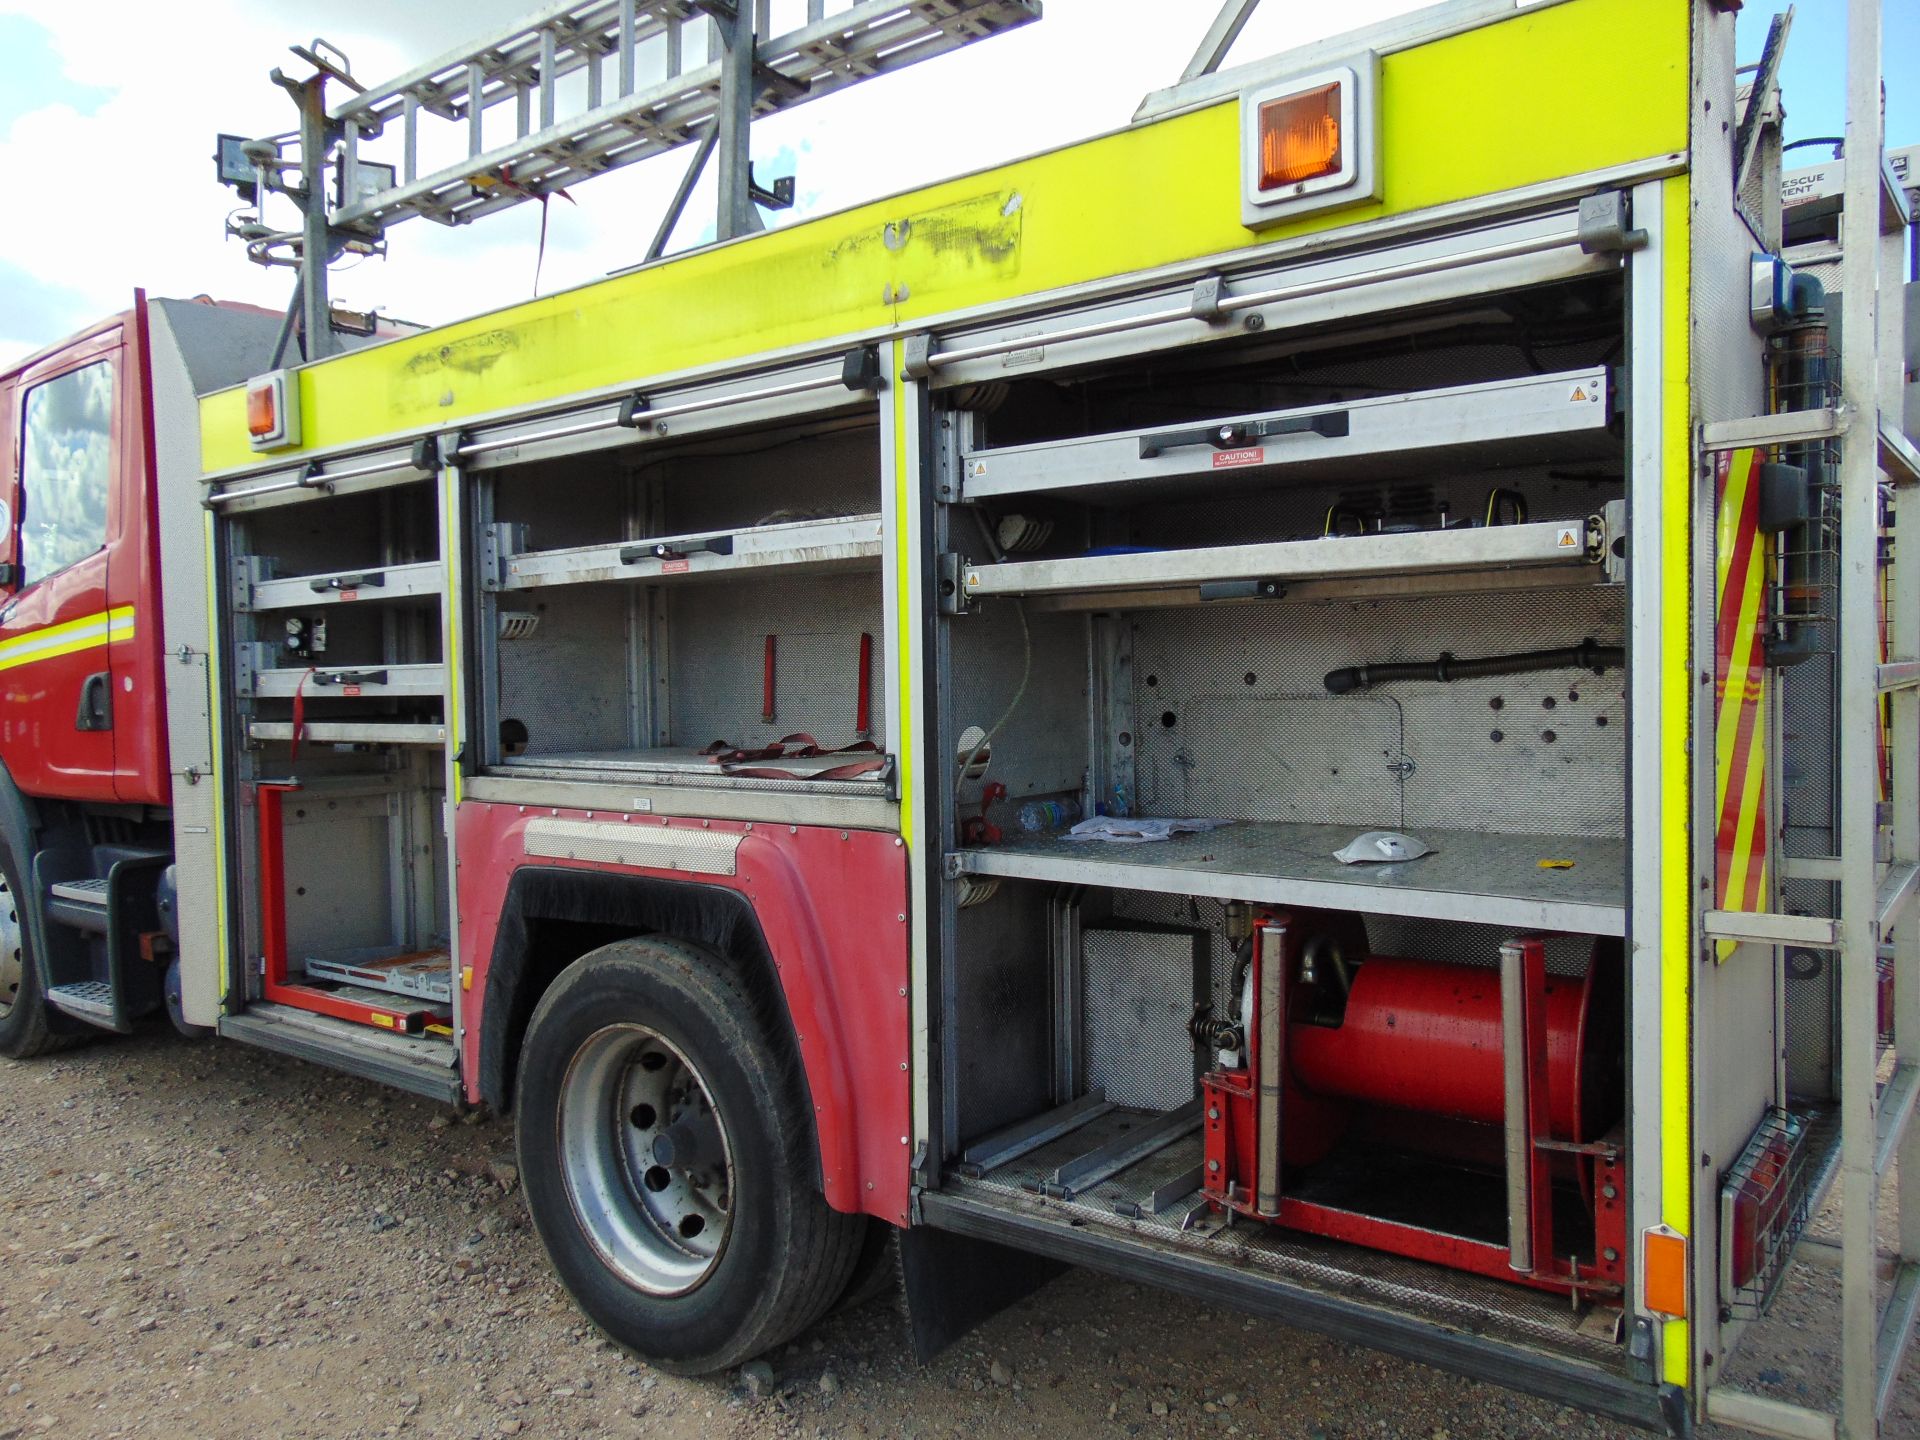 Scania 94D 260 Excalibur Fire Engine - Image 9 of 18